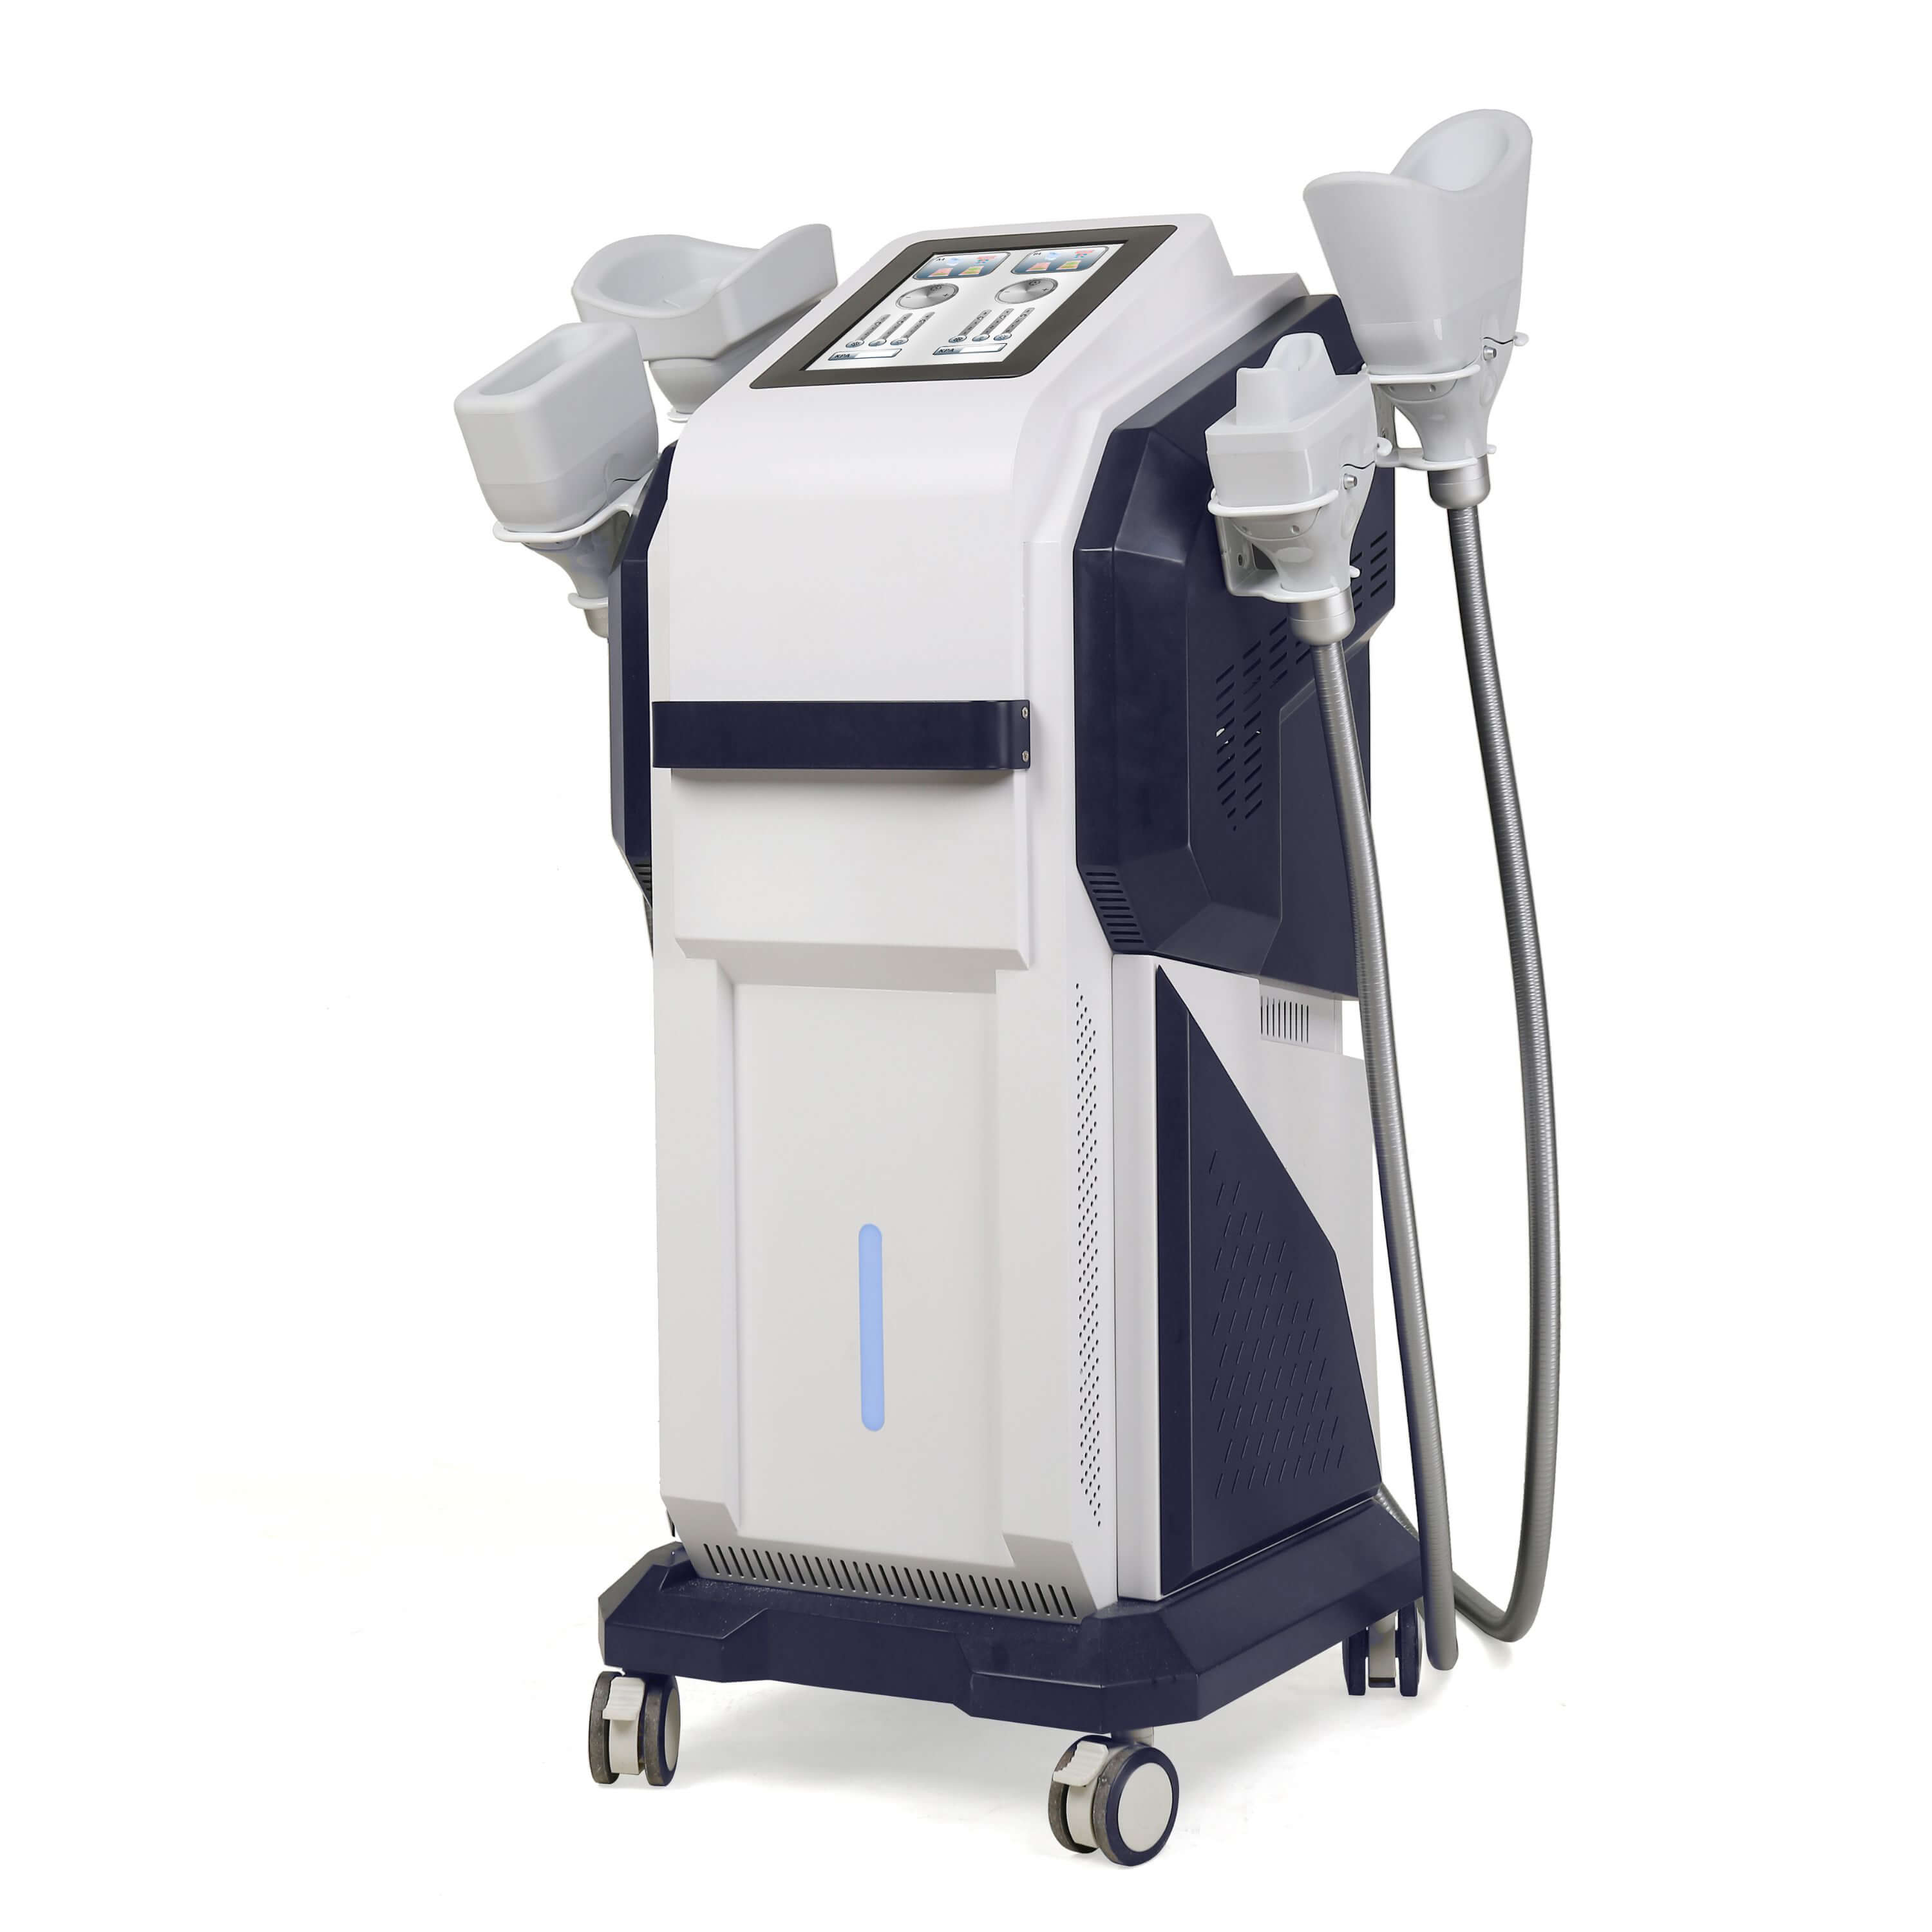 4 Handles 4D 360° Surrounding Cooling Freezing Technology Coolsculpting Machine